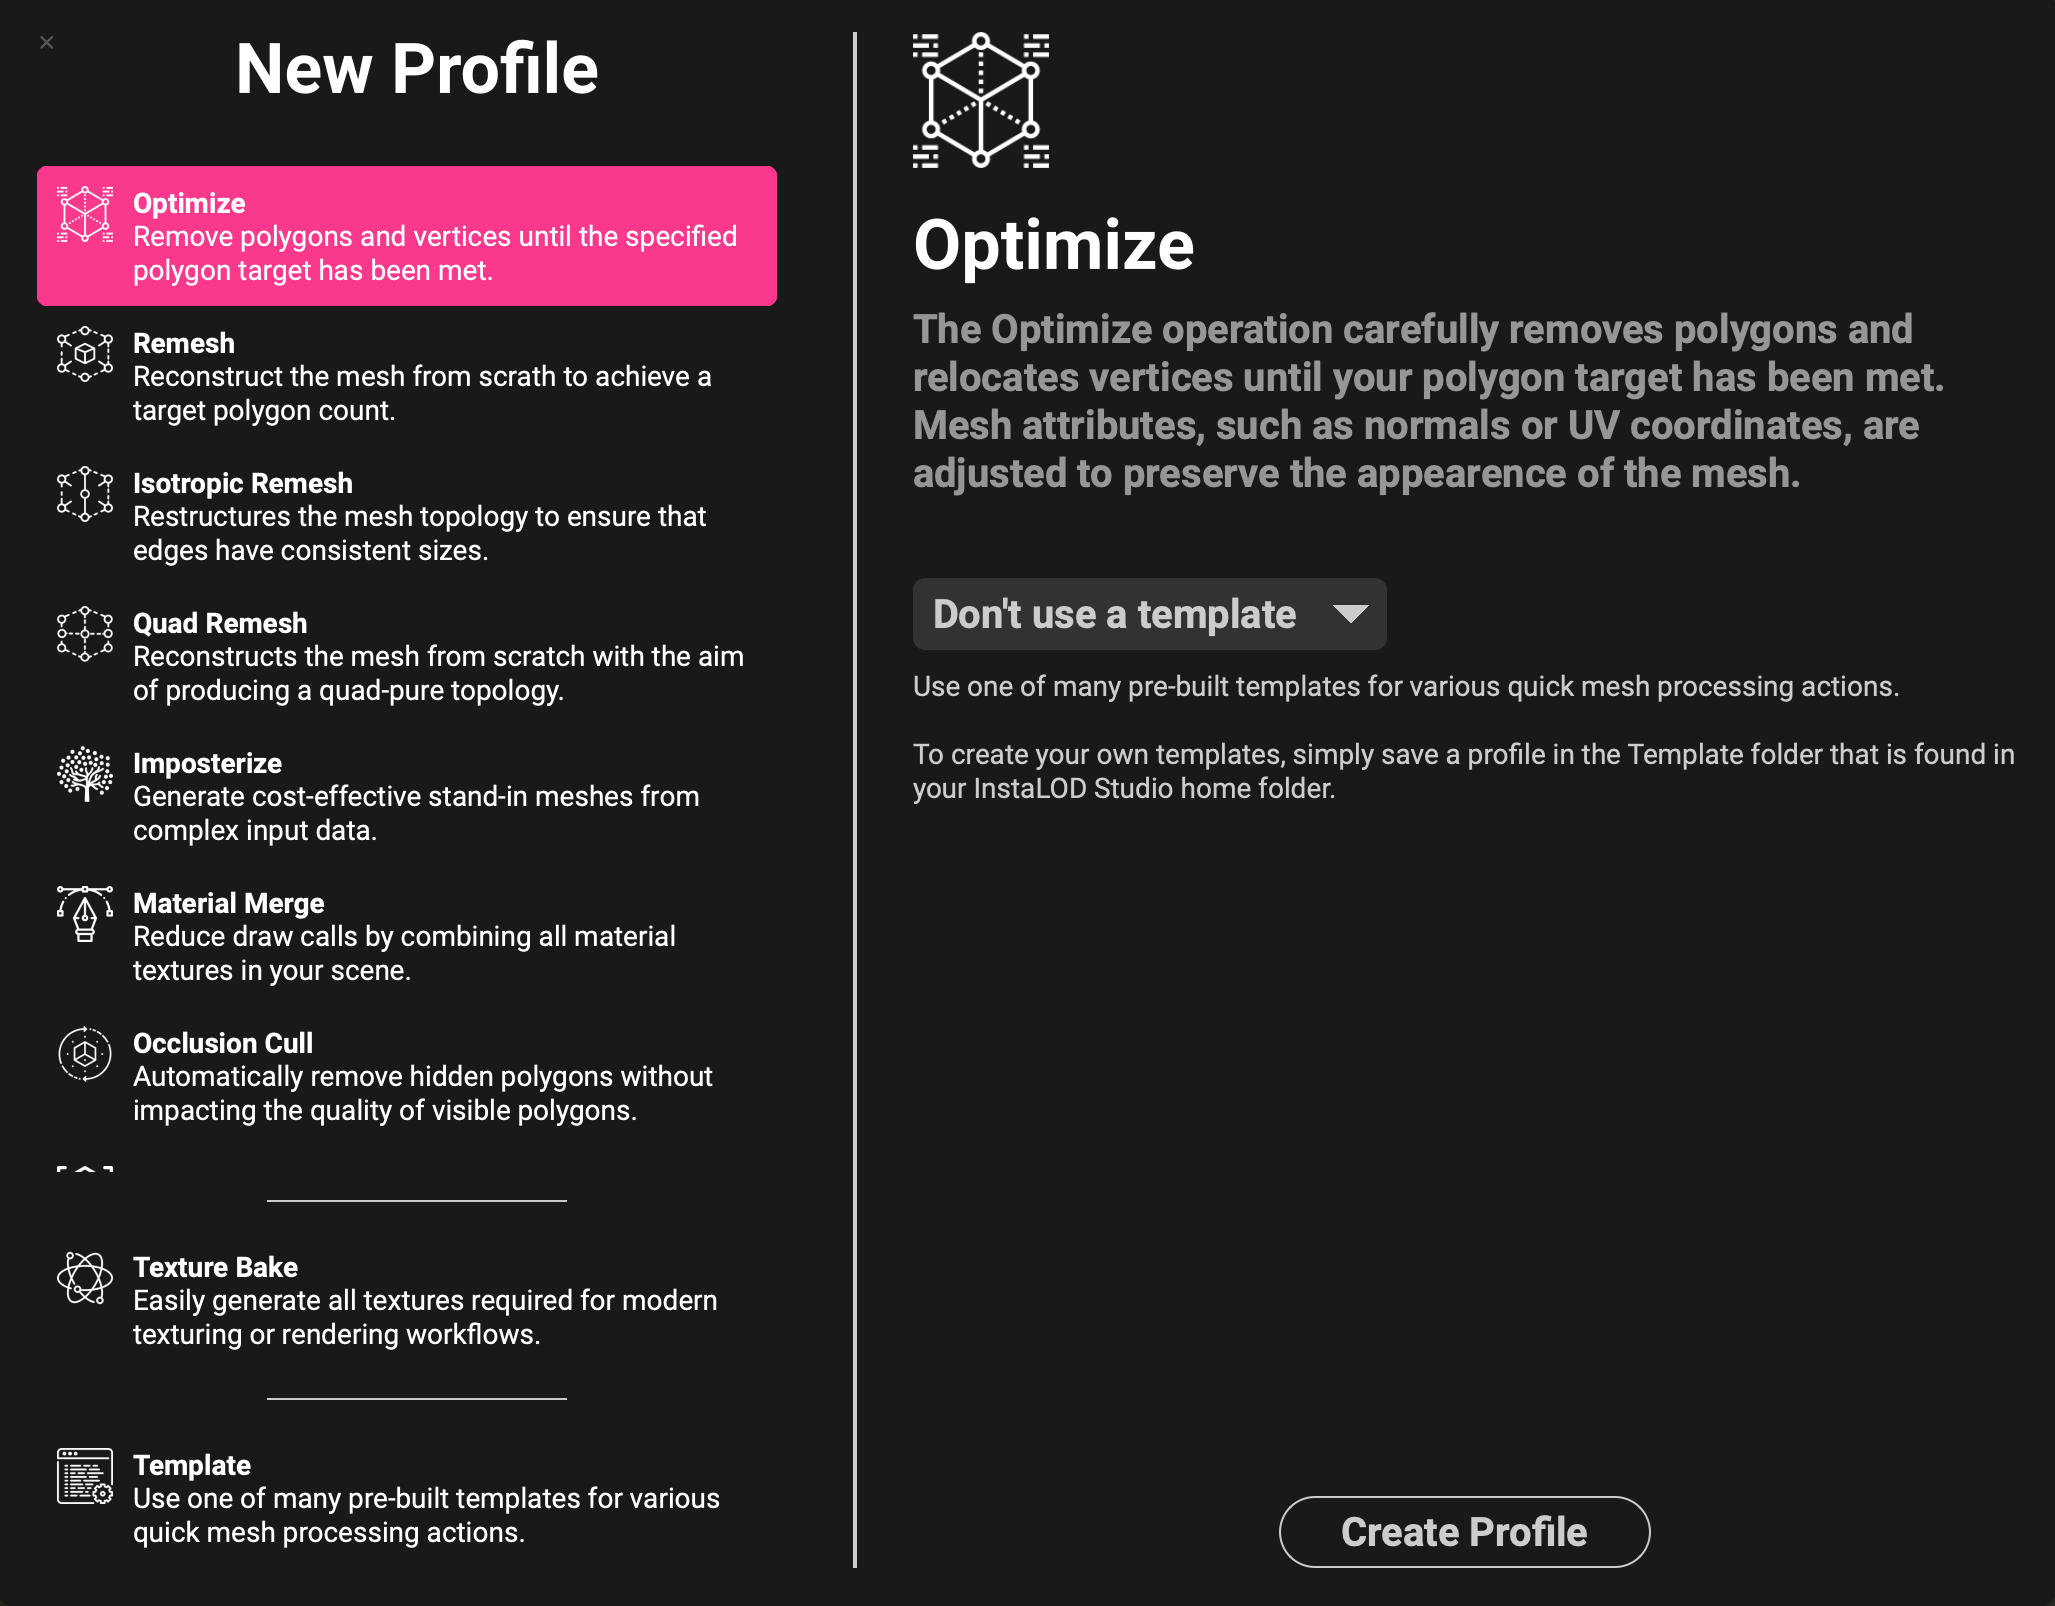 new_profile_optimize.png